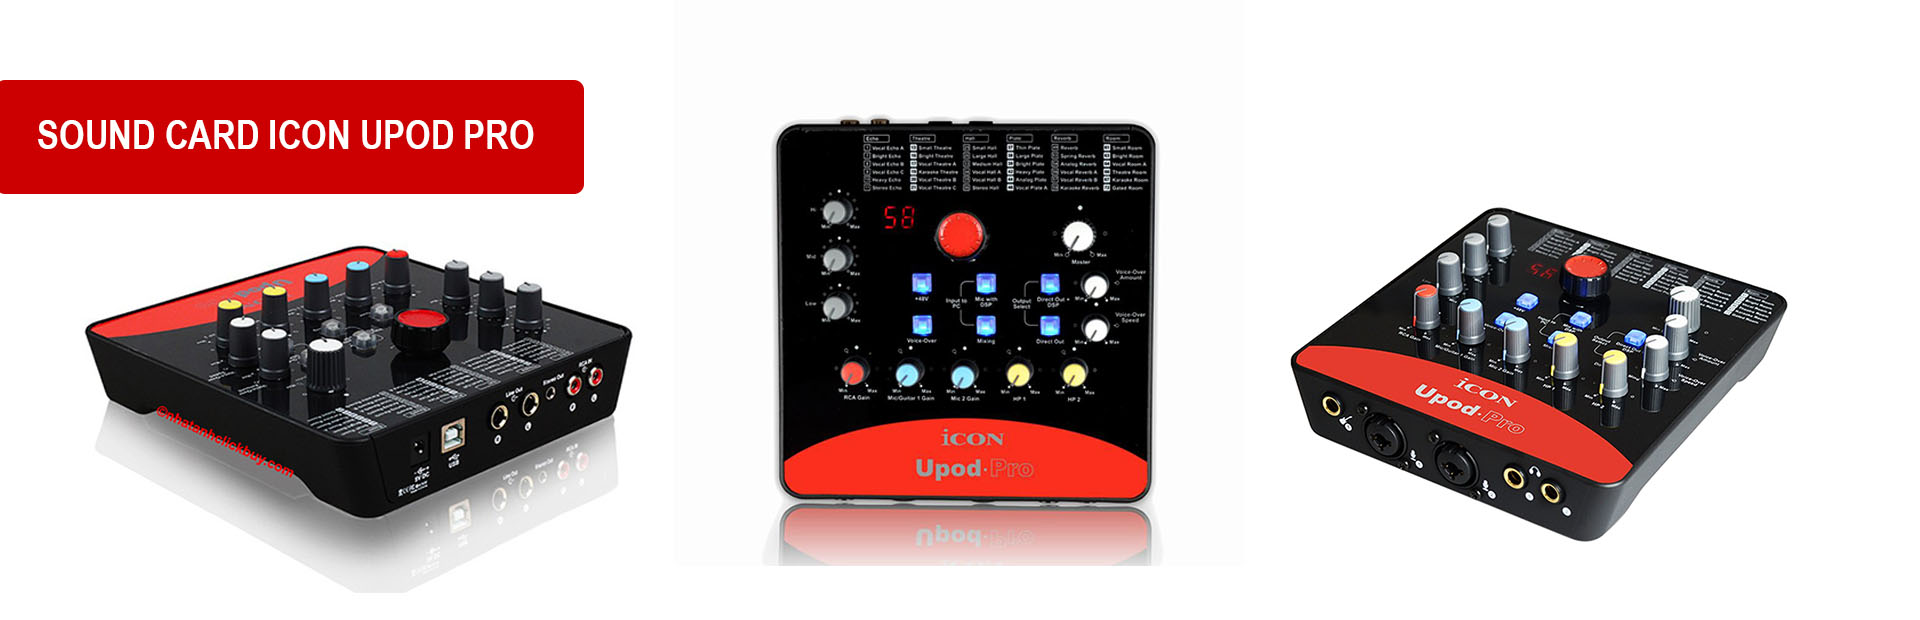 Sound card Icon Upod Pro trong combo livestream chất lượng cao Micro Takstar TAK55 & Icon Upod Pro